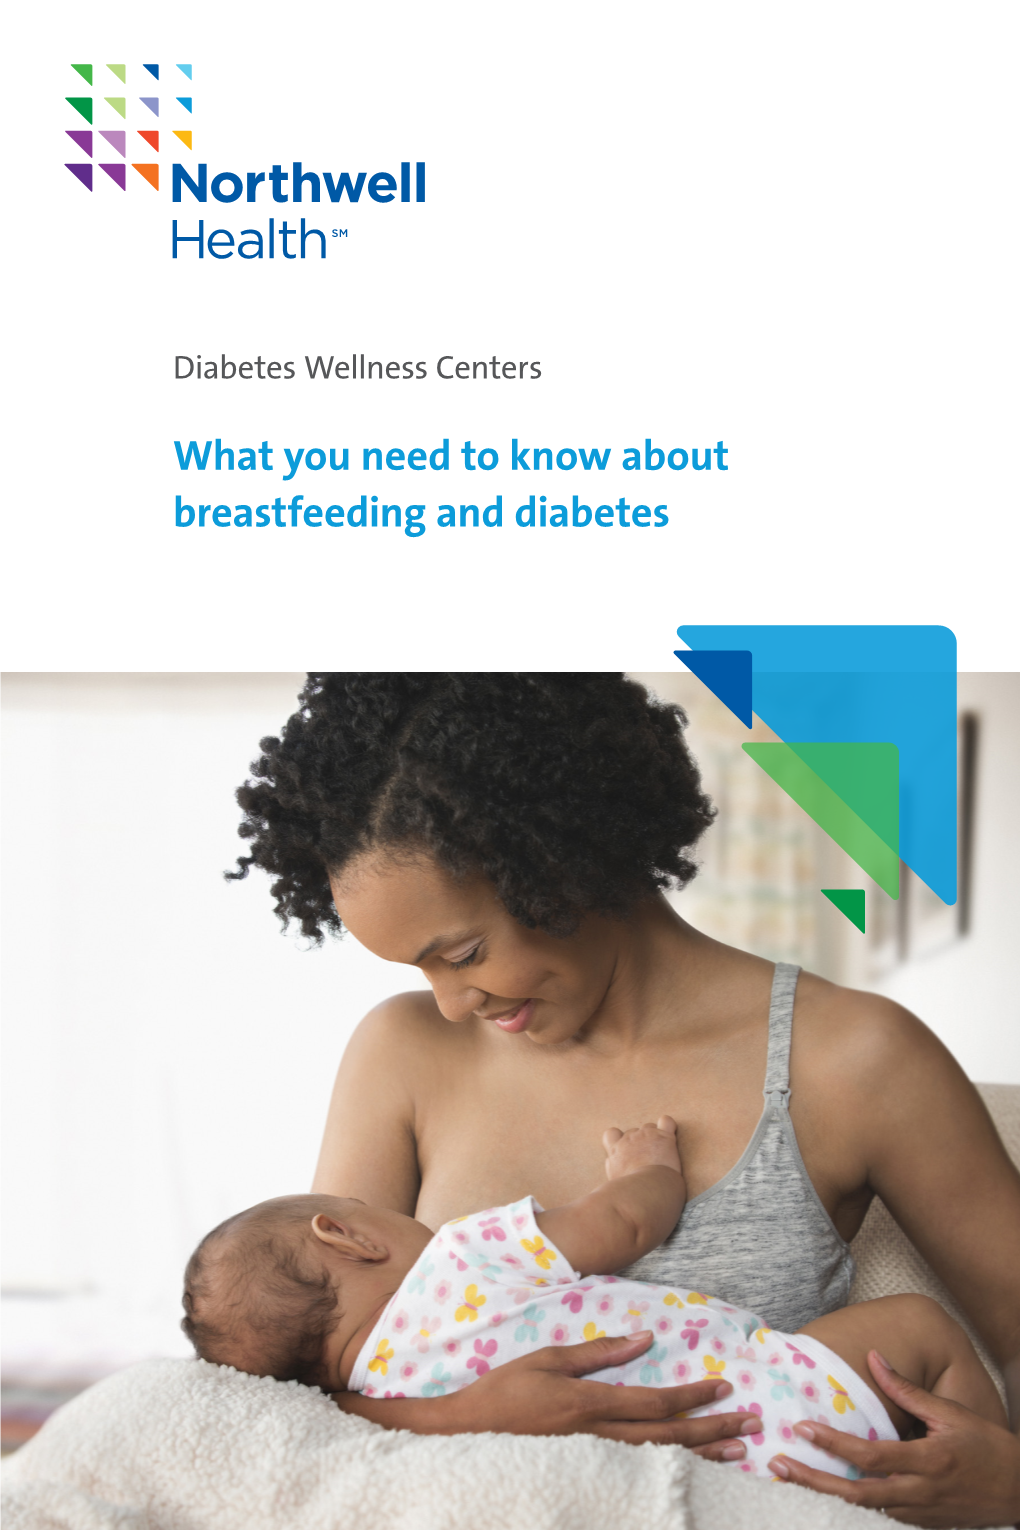 What You Need to Know About Breastfeeding and Diabetes Breastfeeding Is One of the Most Important Things You Can Do for Your Health and for the Health of Your Baby